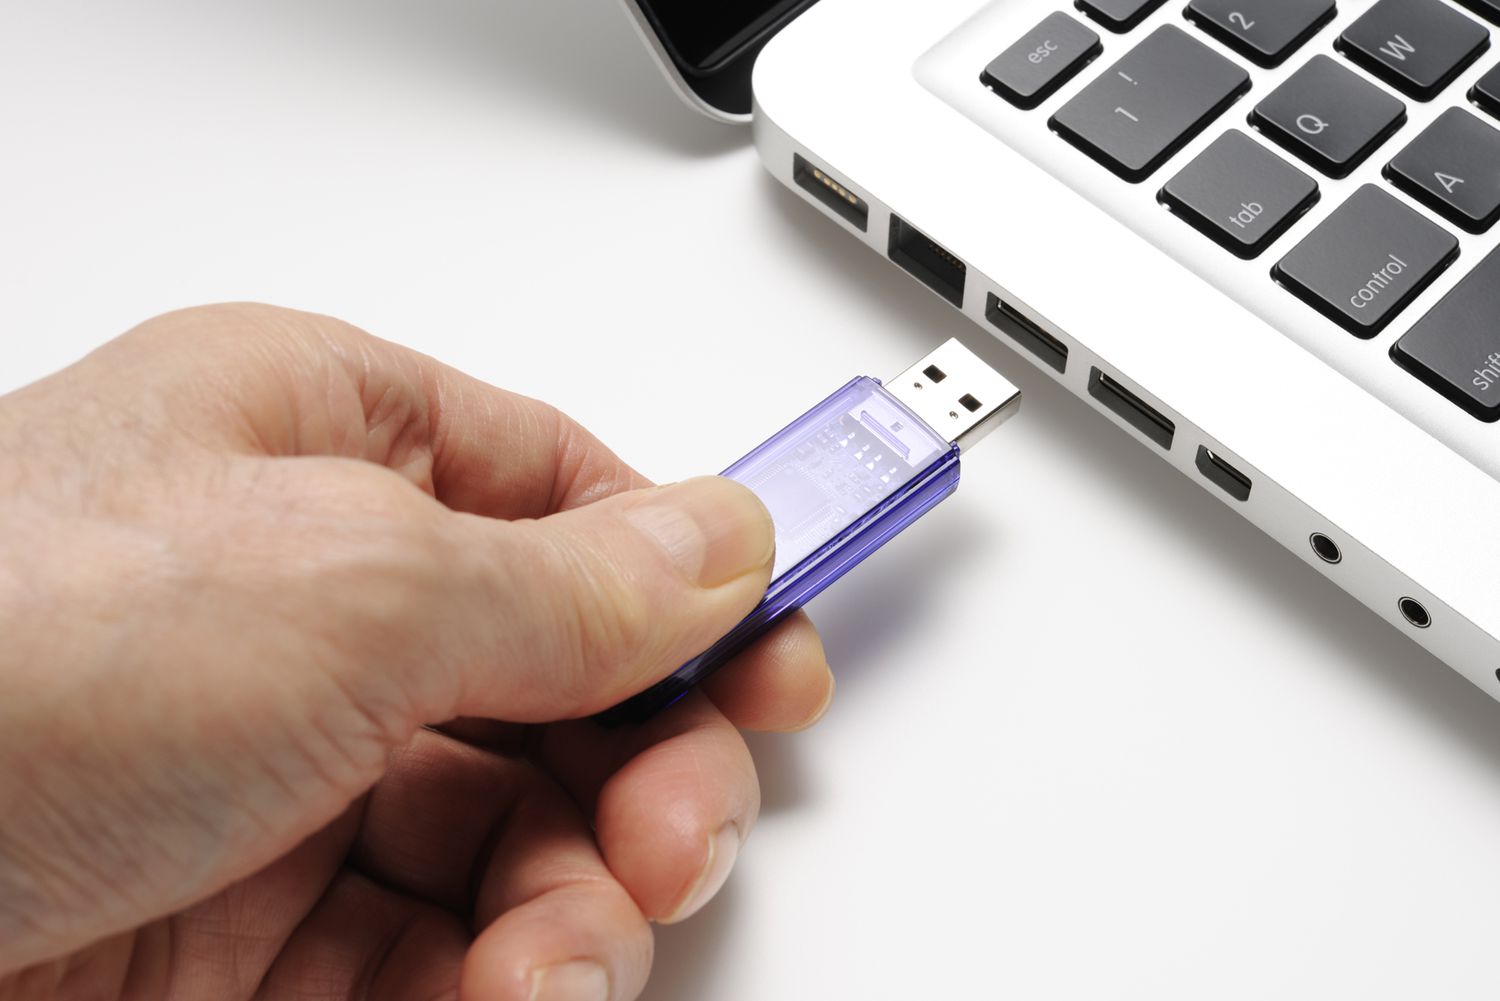 How To Create An Emergency Mac OS Boot Device Using A USB Flash Drive